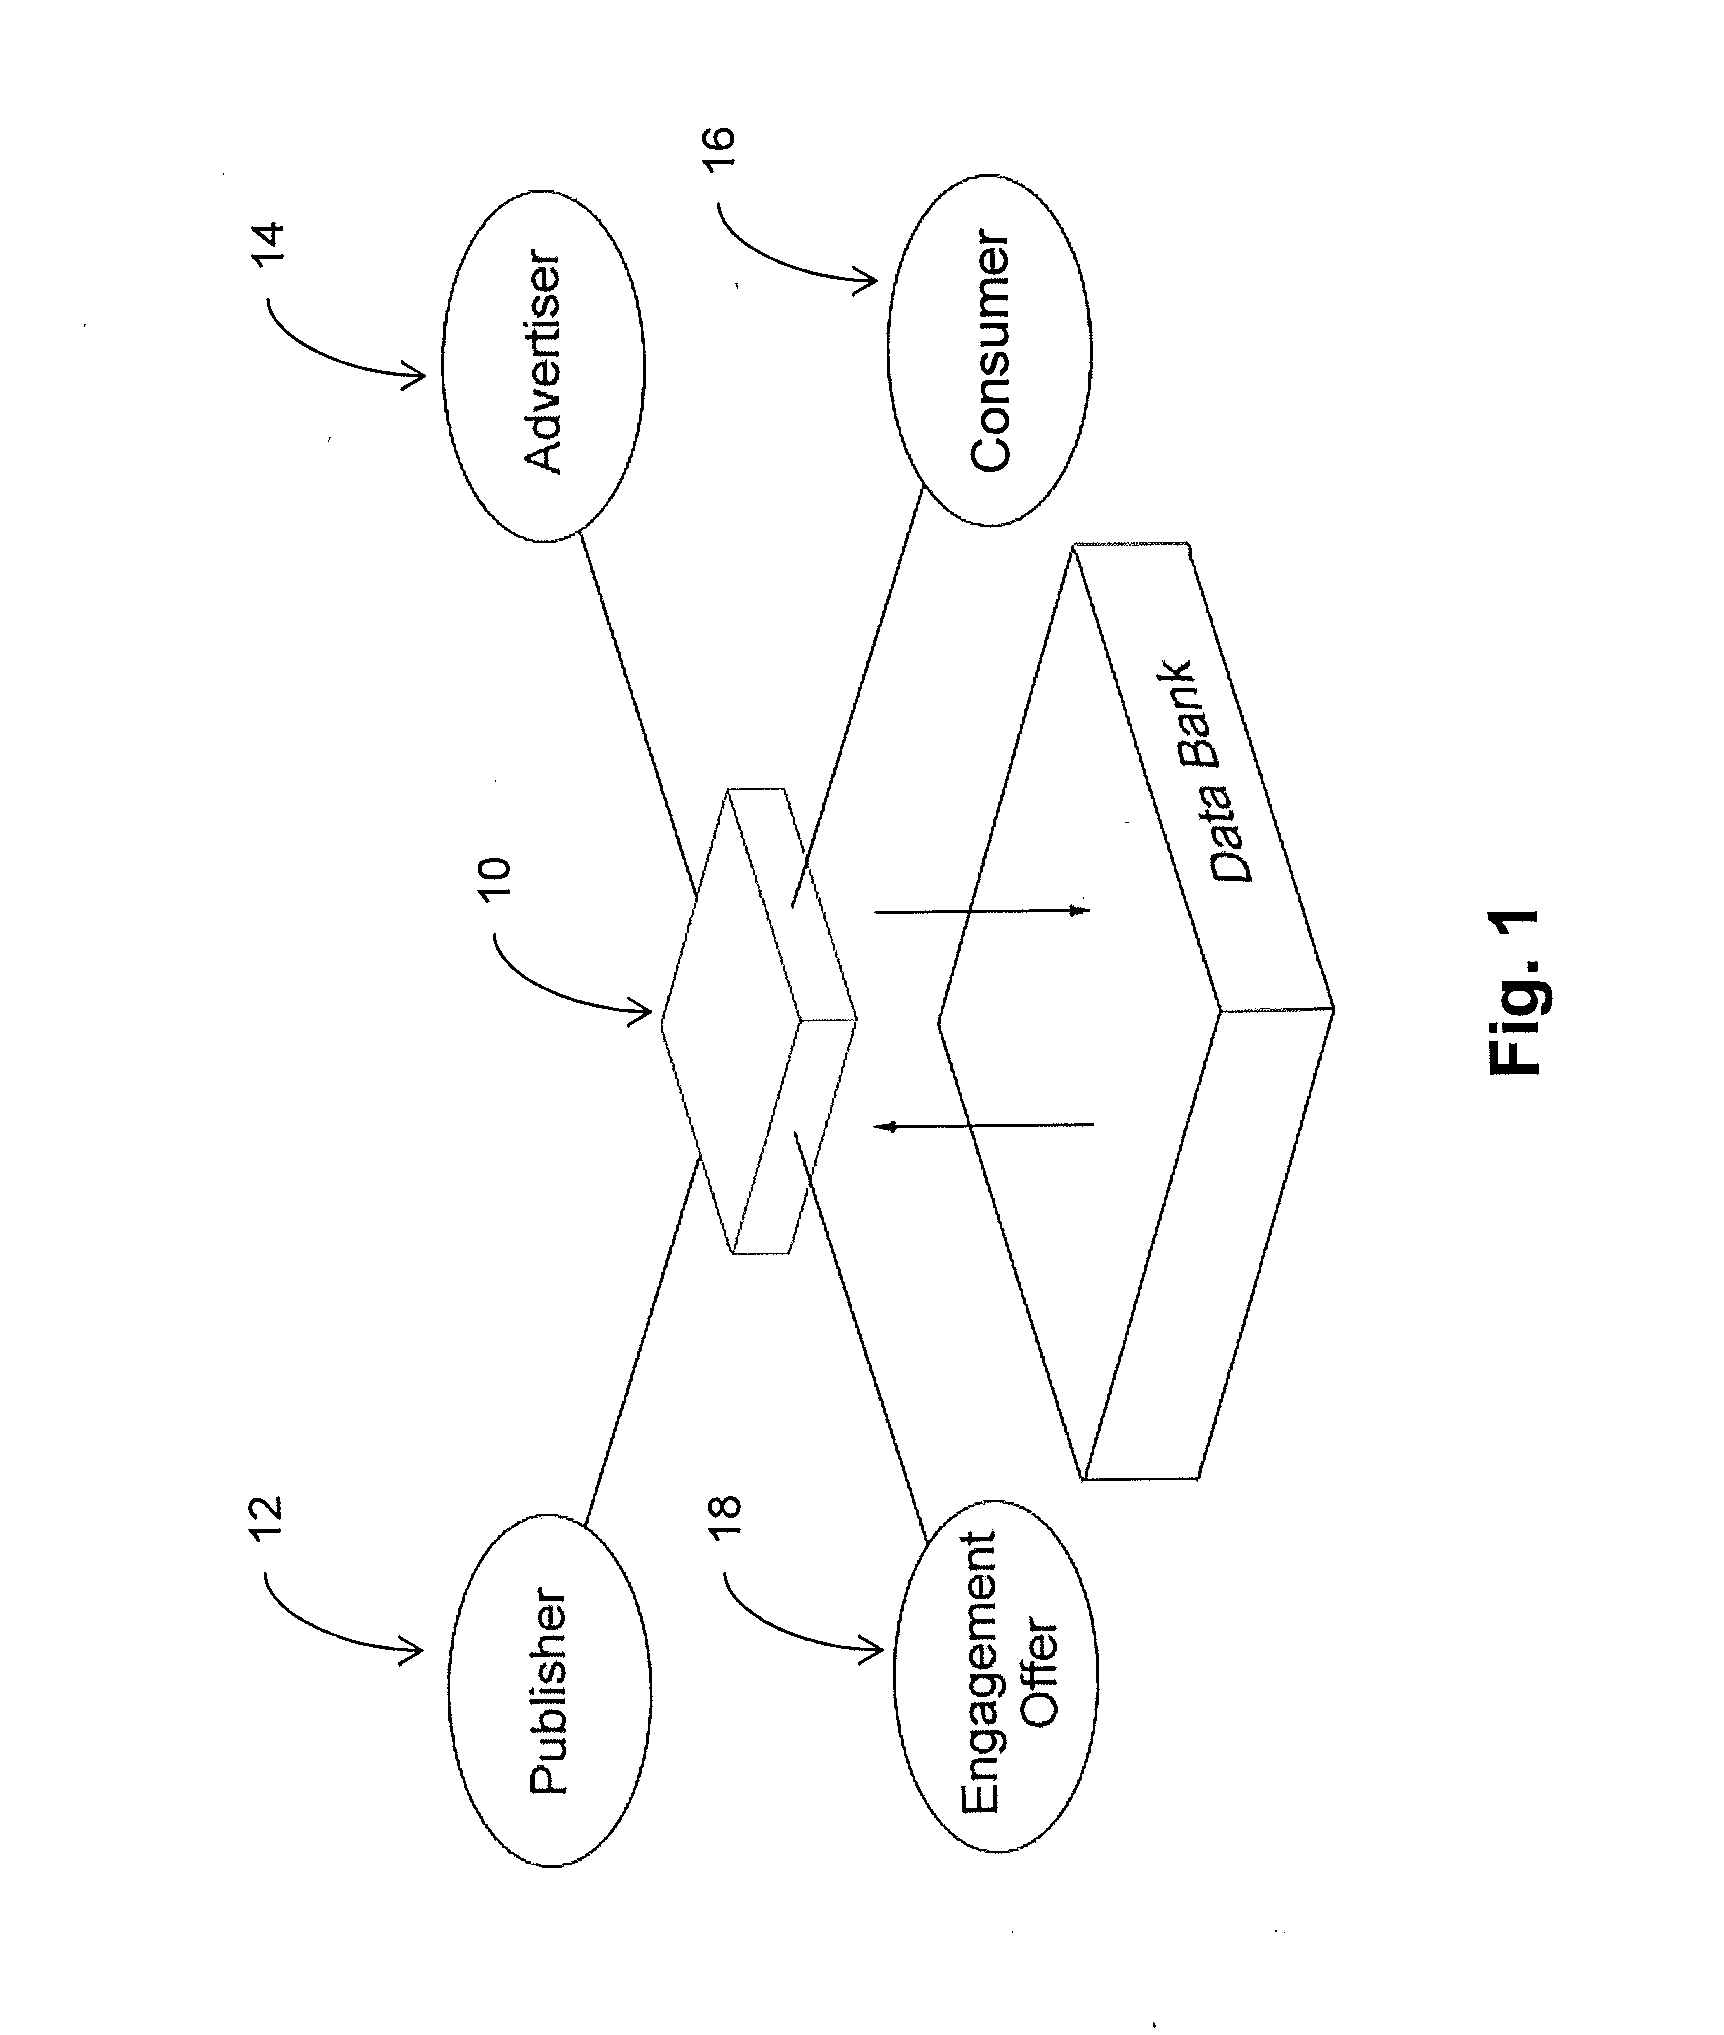 Digital Advertising System and Method